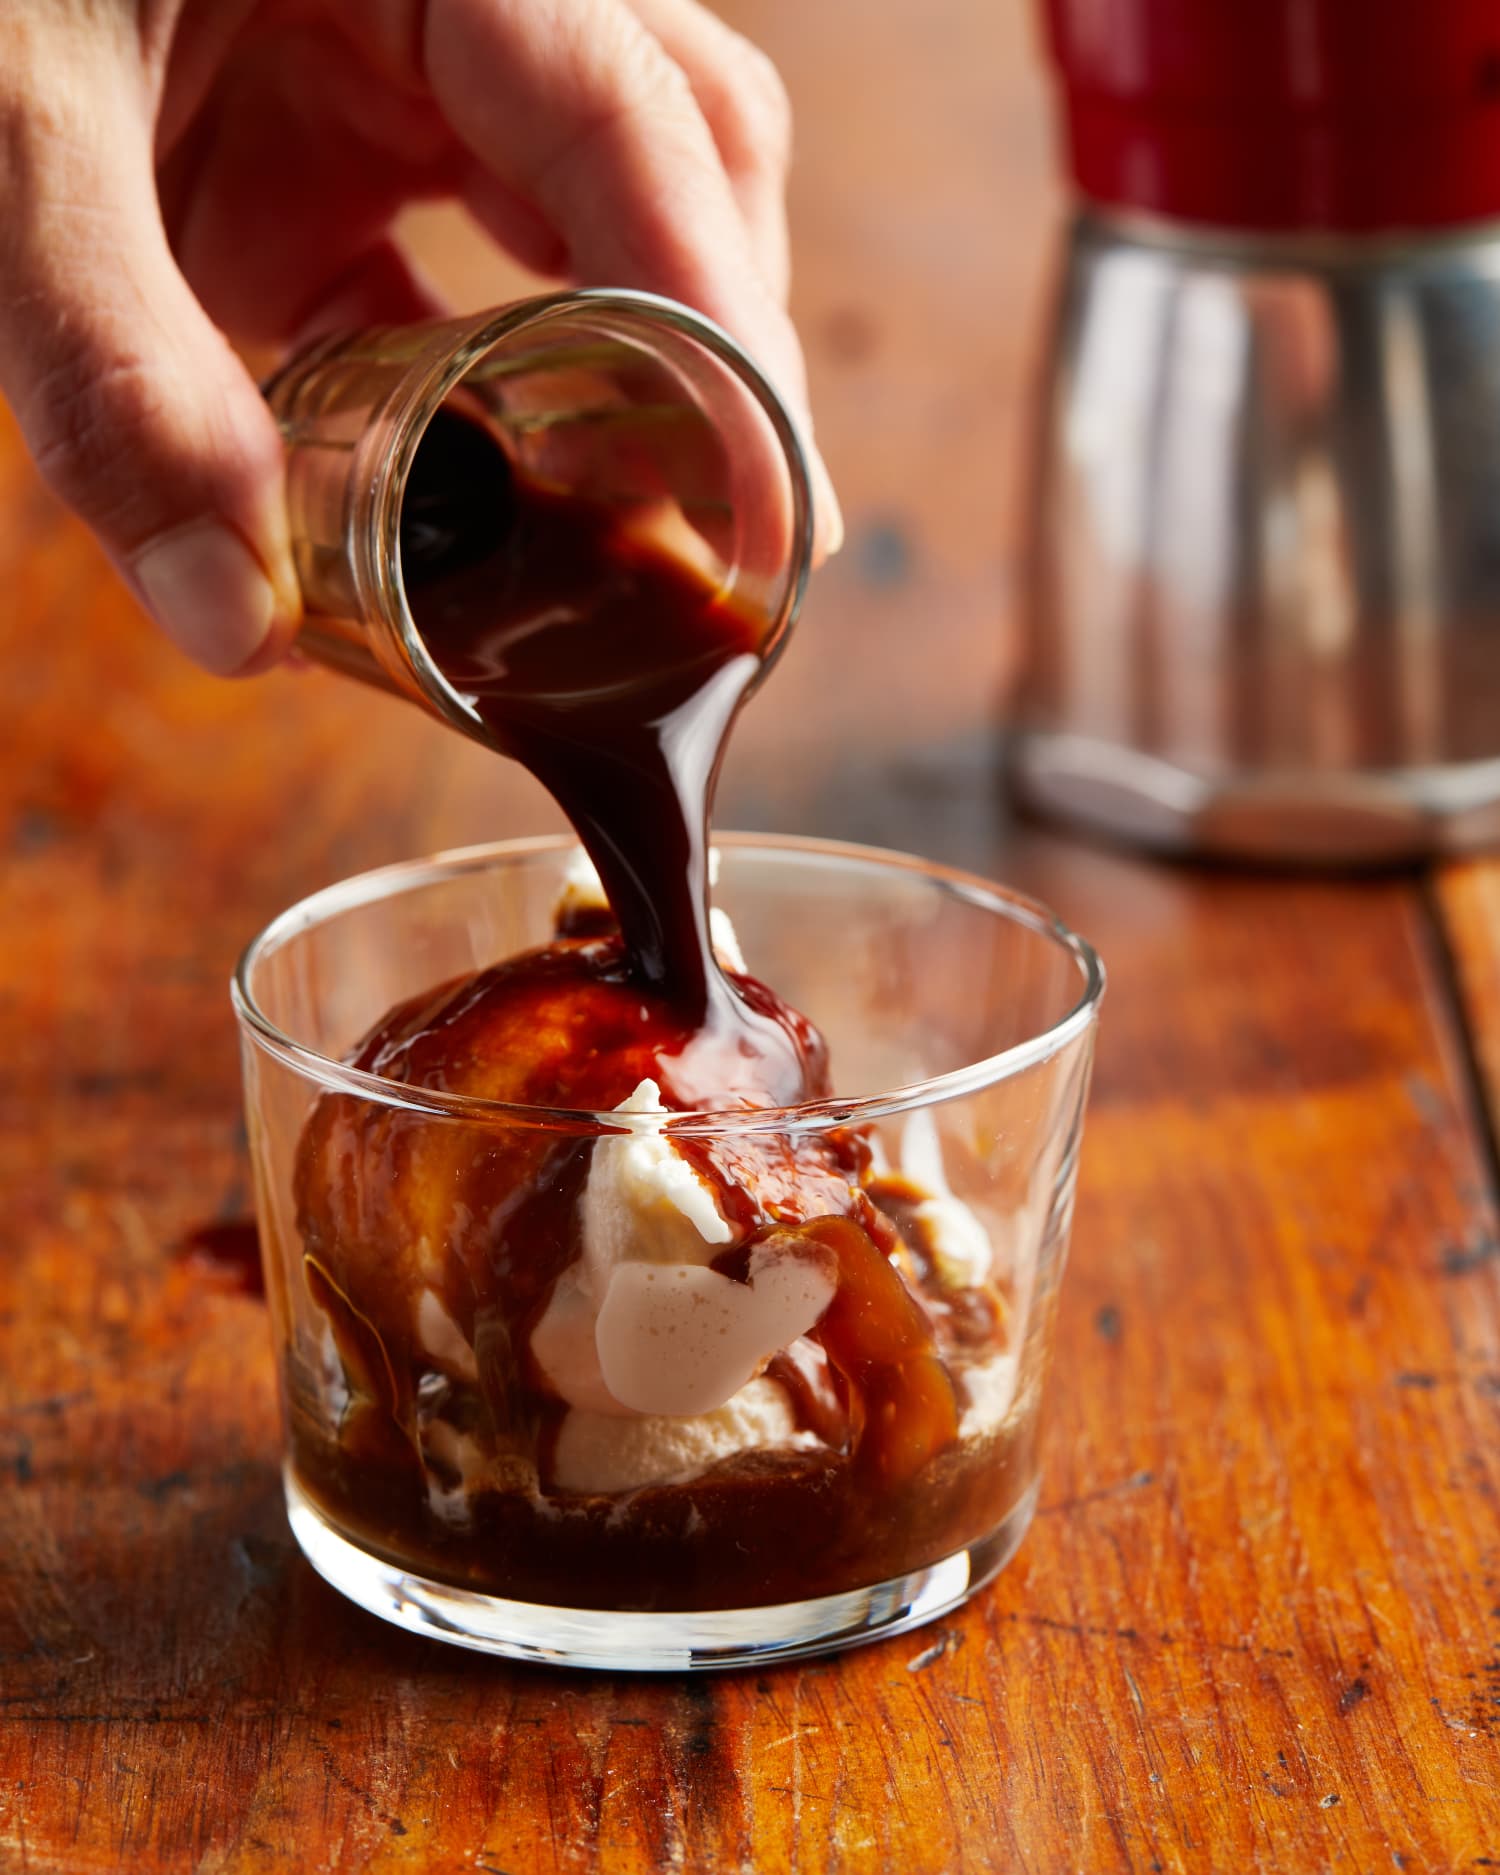 This 3-Ingredient Italian Dessert Is a Must-Make for Coffee Lovers